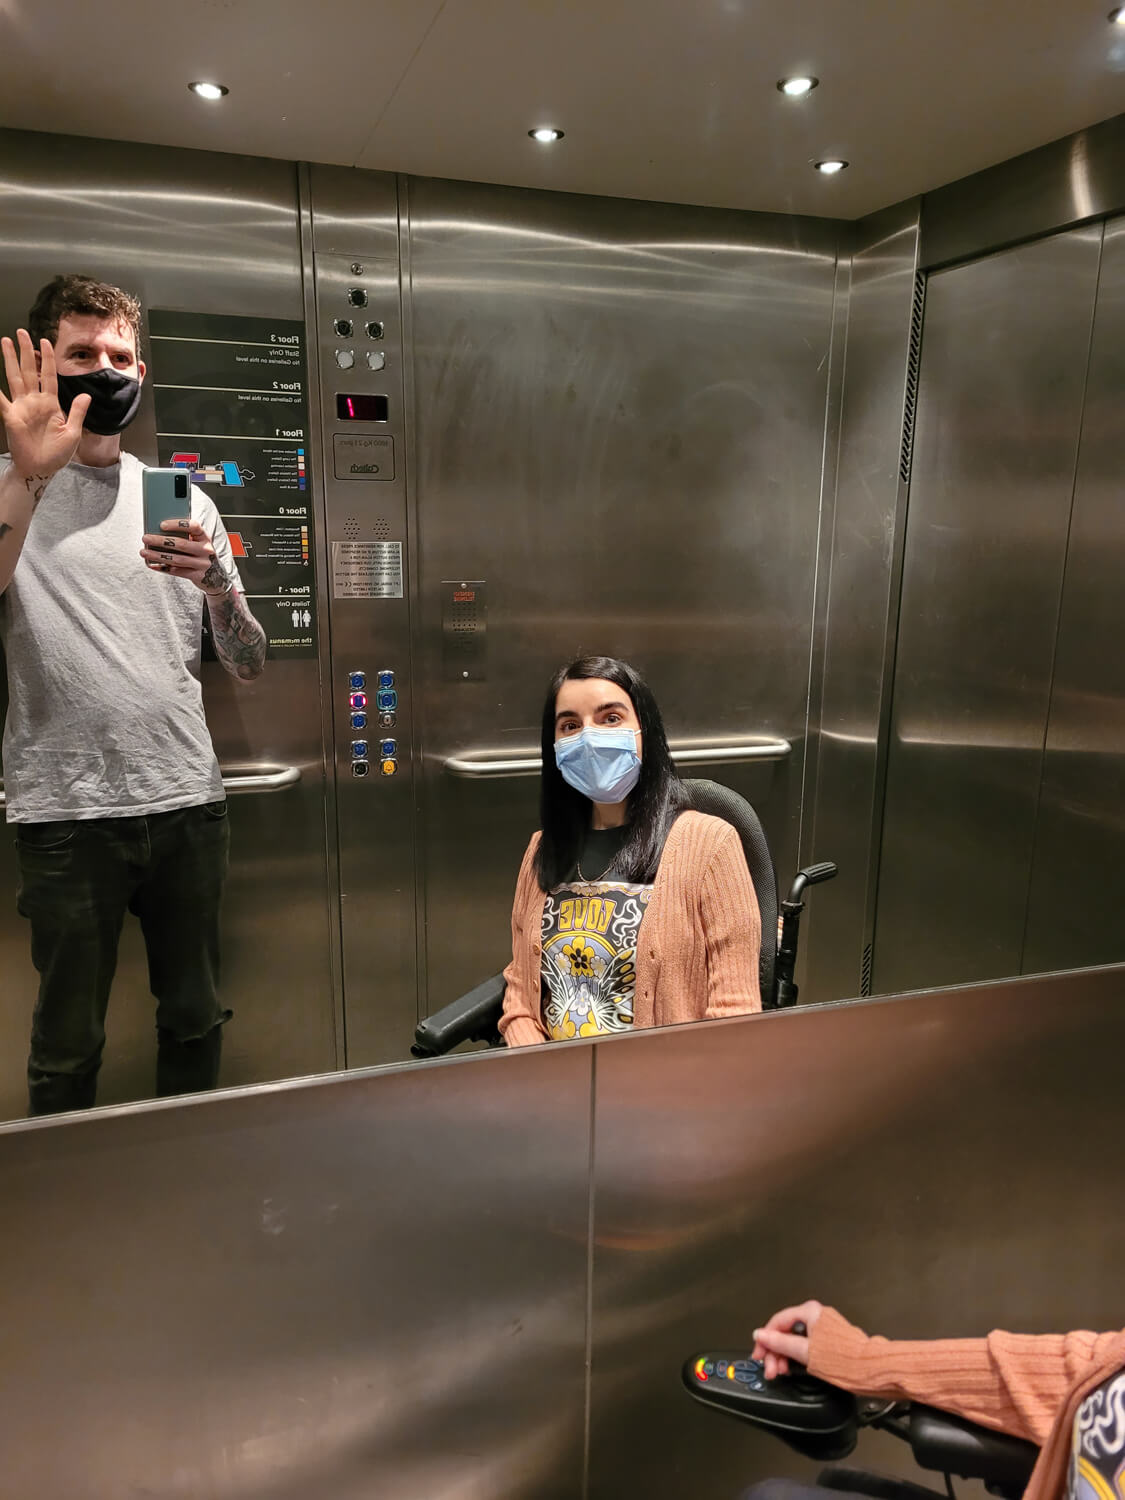 Emma and Allan taking a mirror selfie inside the lift. They are both wearing face masks.